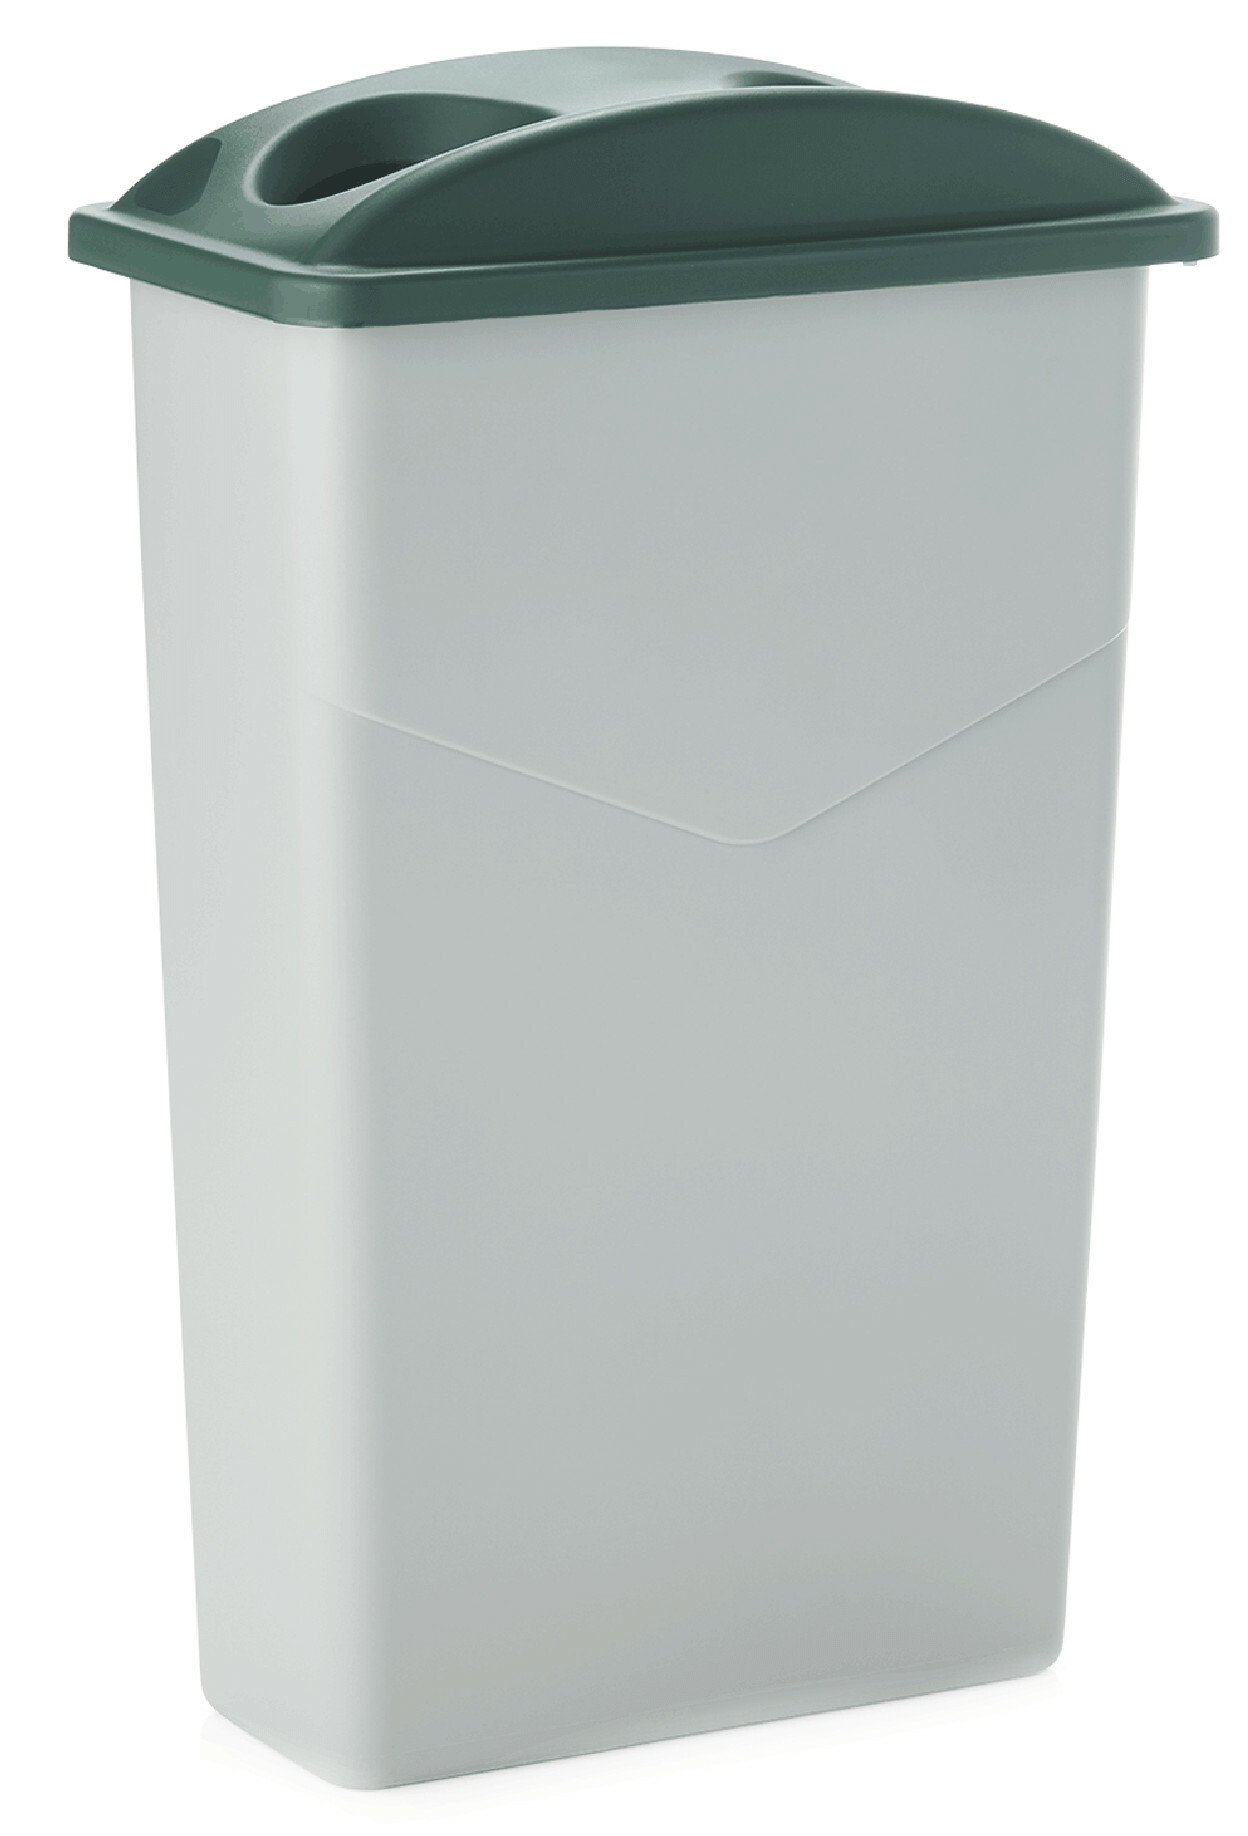 75l garbage container with a green lid for throwing bottles